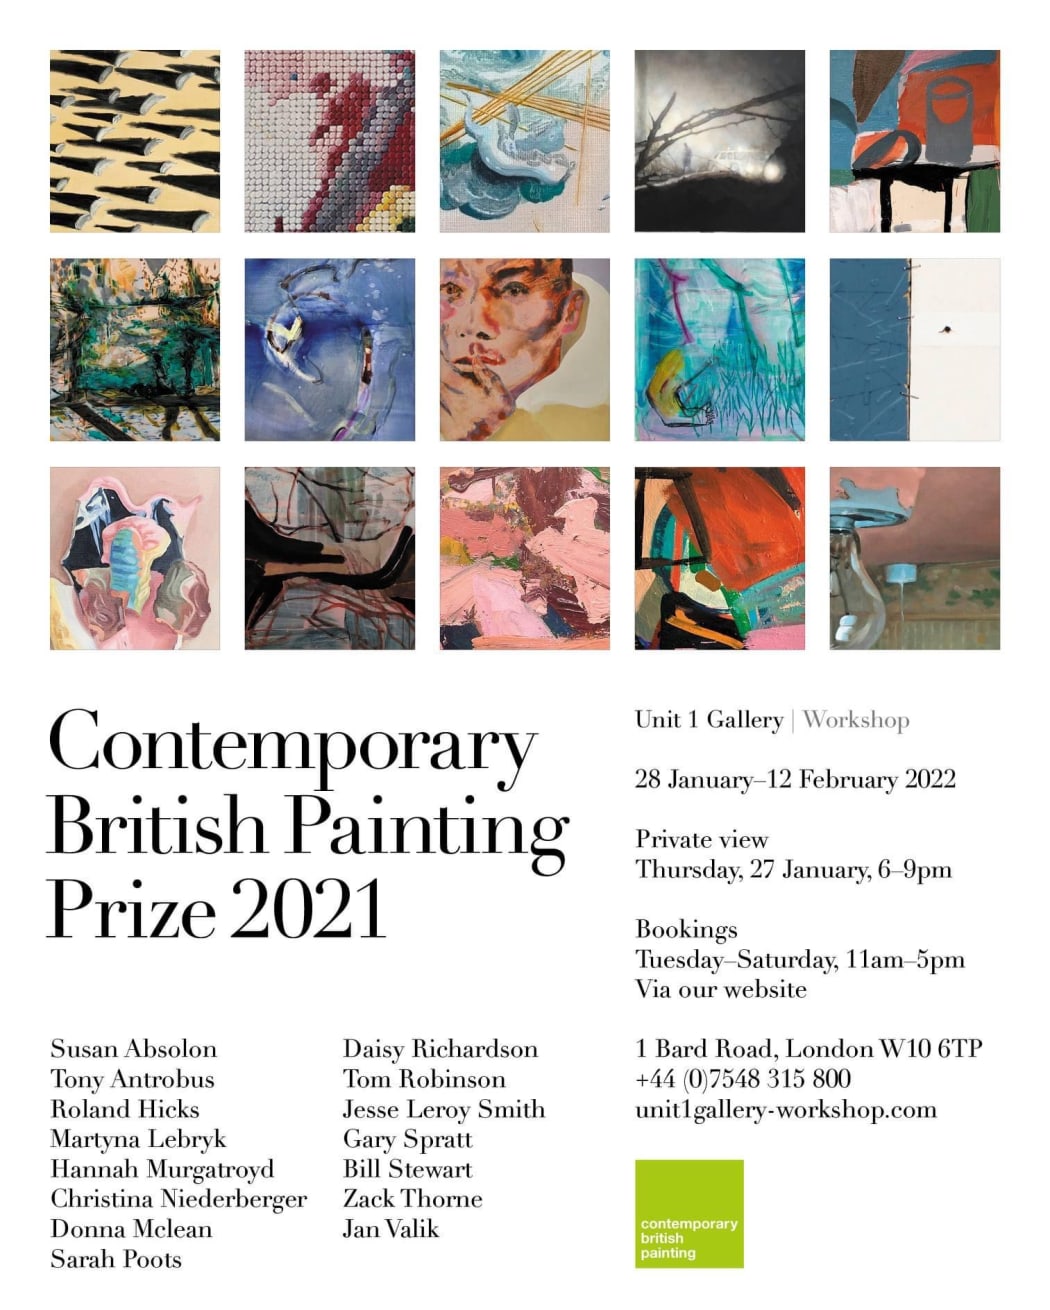 Contemporary British Painting Prize 2021